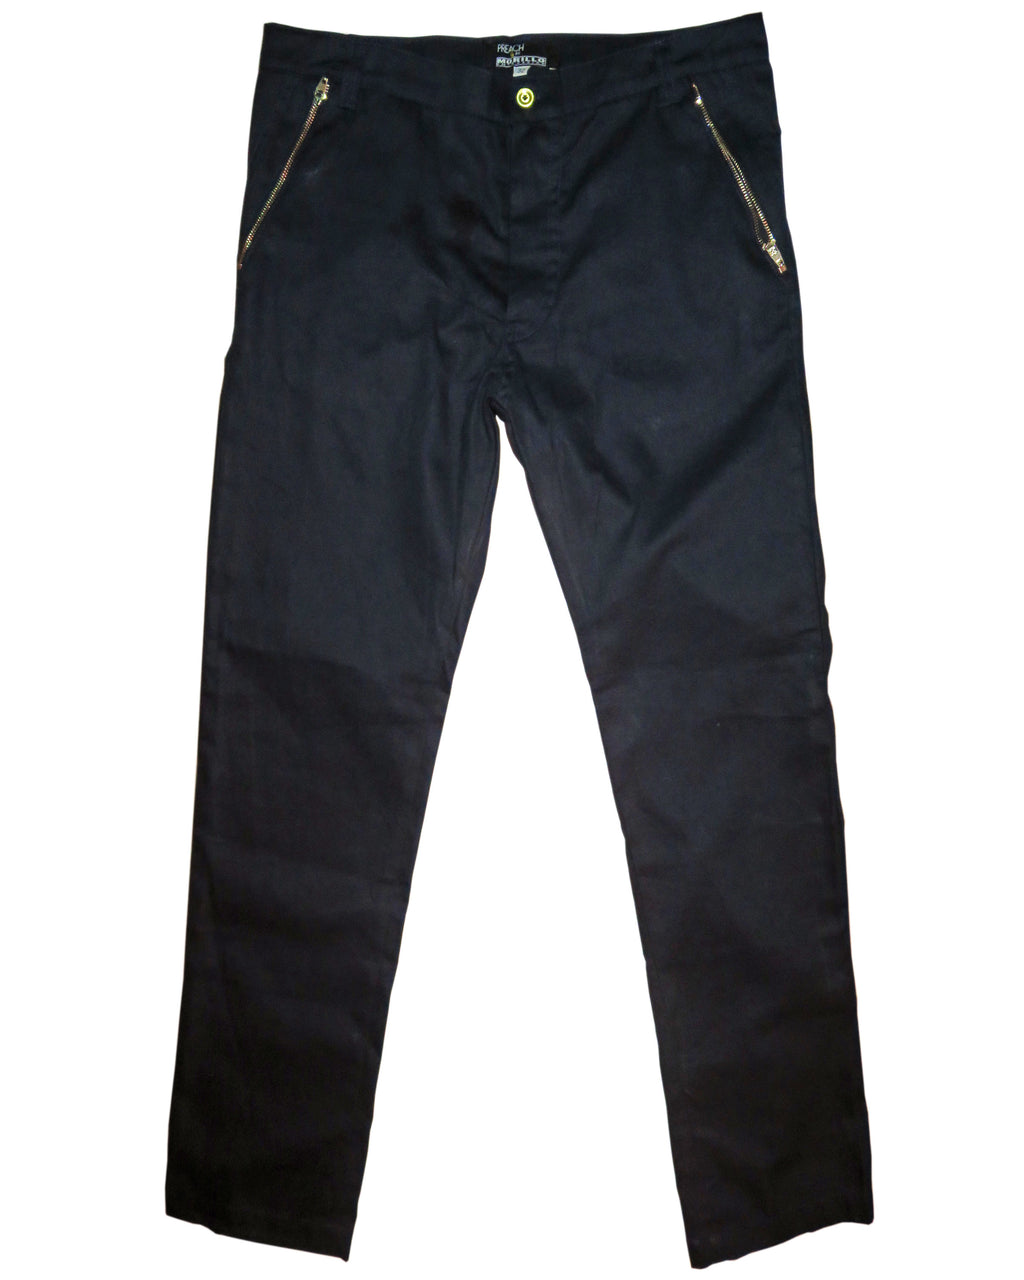 SLIM FITTED COTTON TWILL ZIPPED PANT Pants - MORILLO ENTERPRISE 